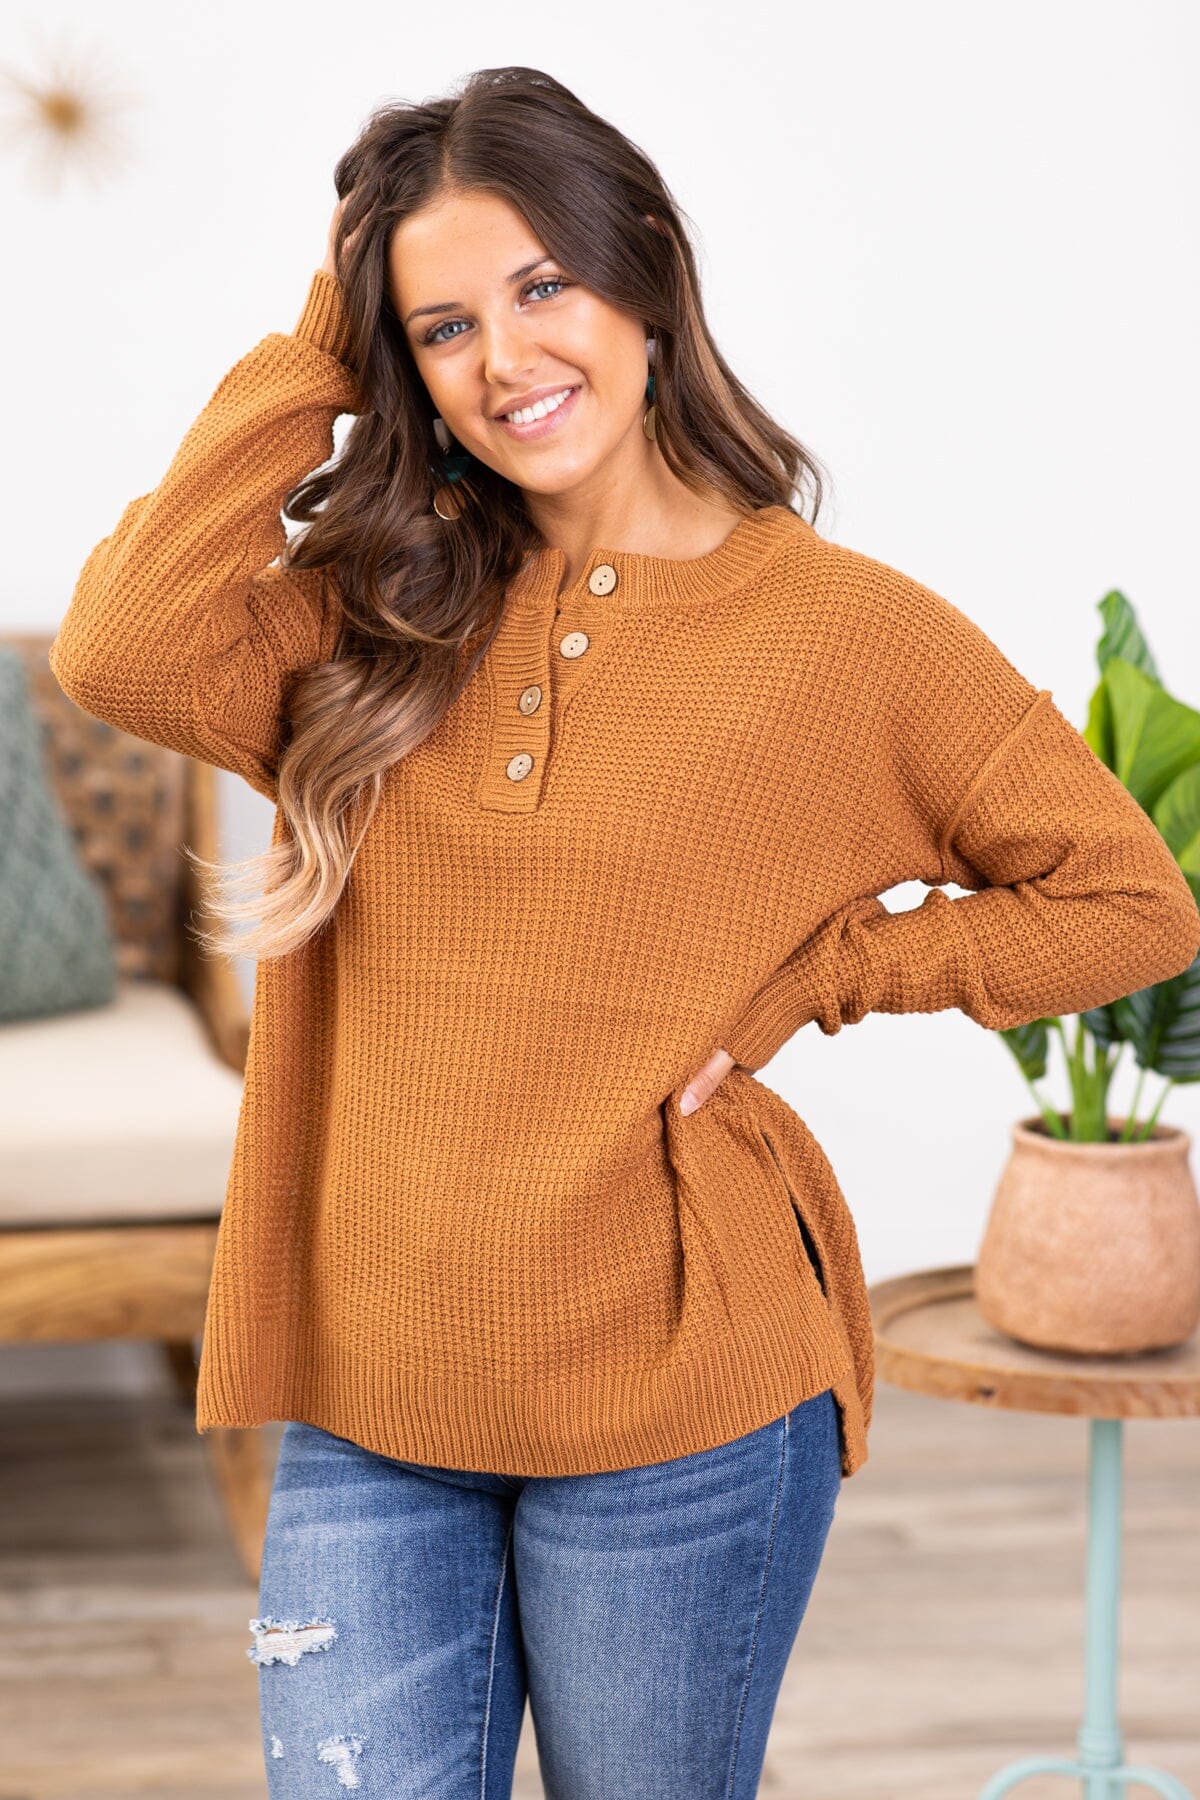 Cinnamon Waffle Knit Sweater With Buttons - Filly Flair